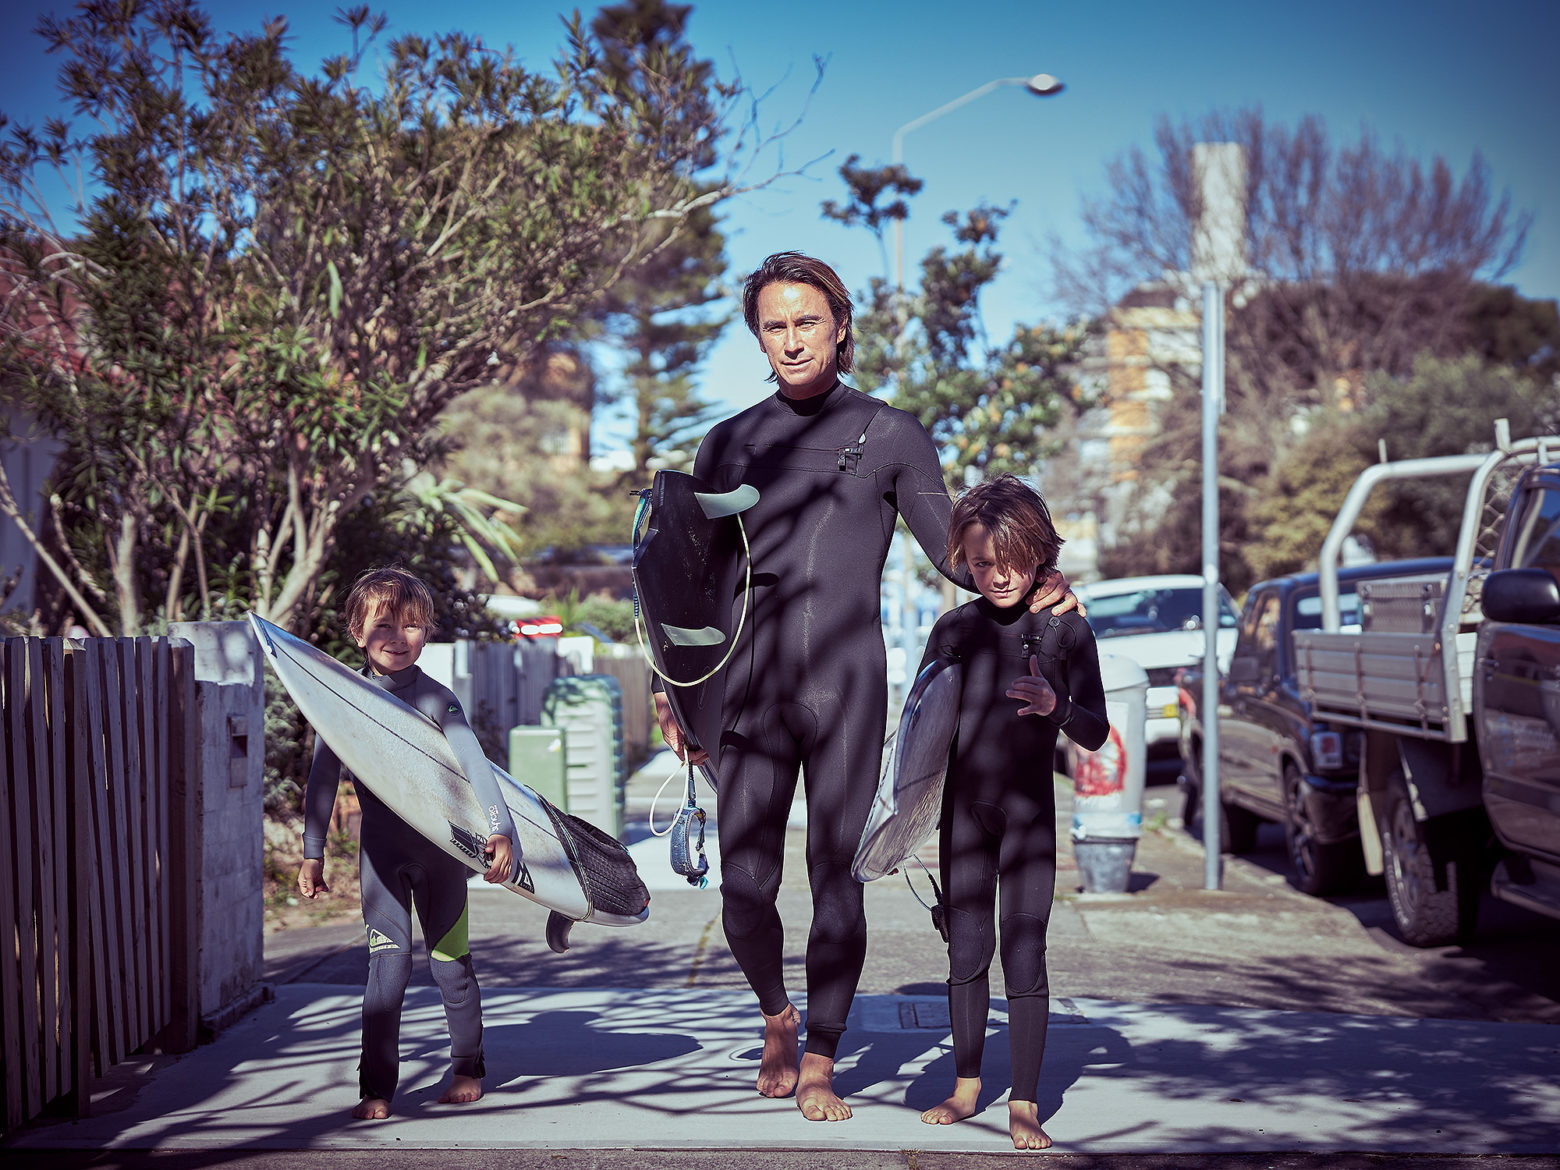 Uge and his family are surfers first, passionate about the ocean